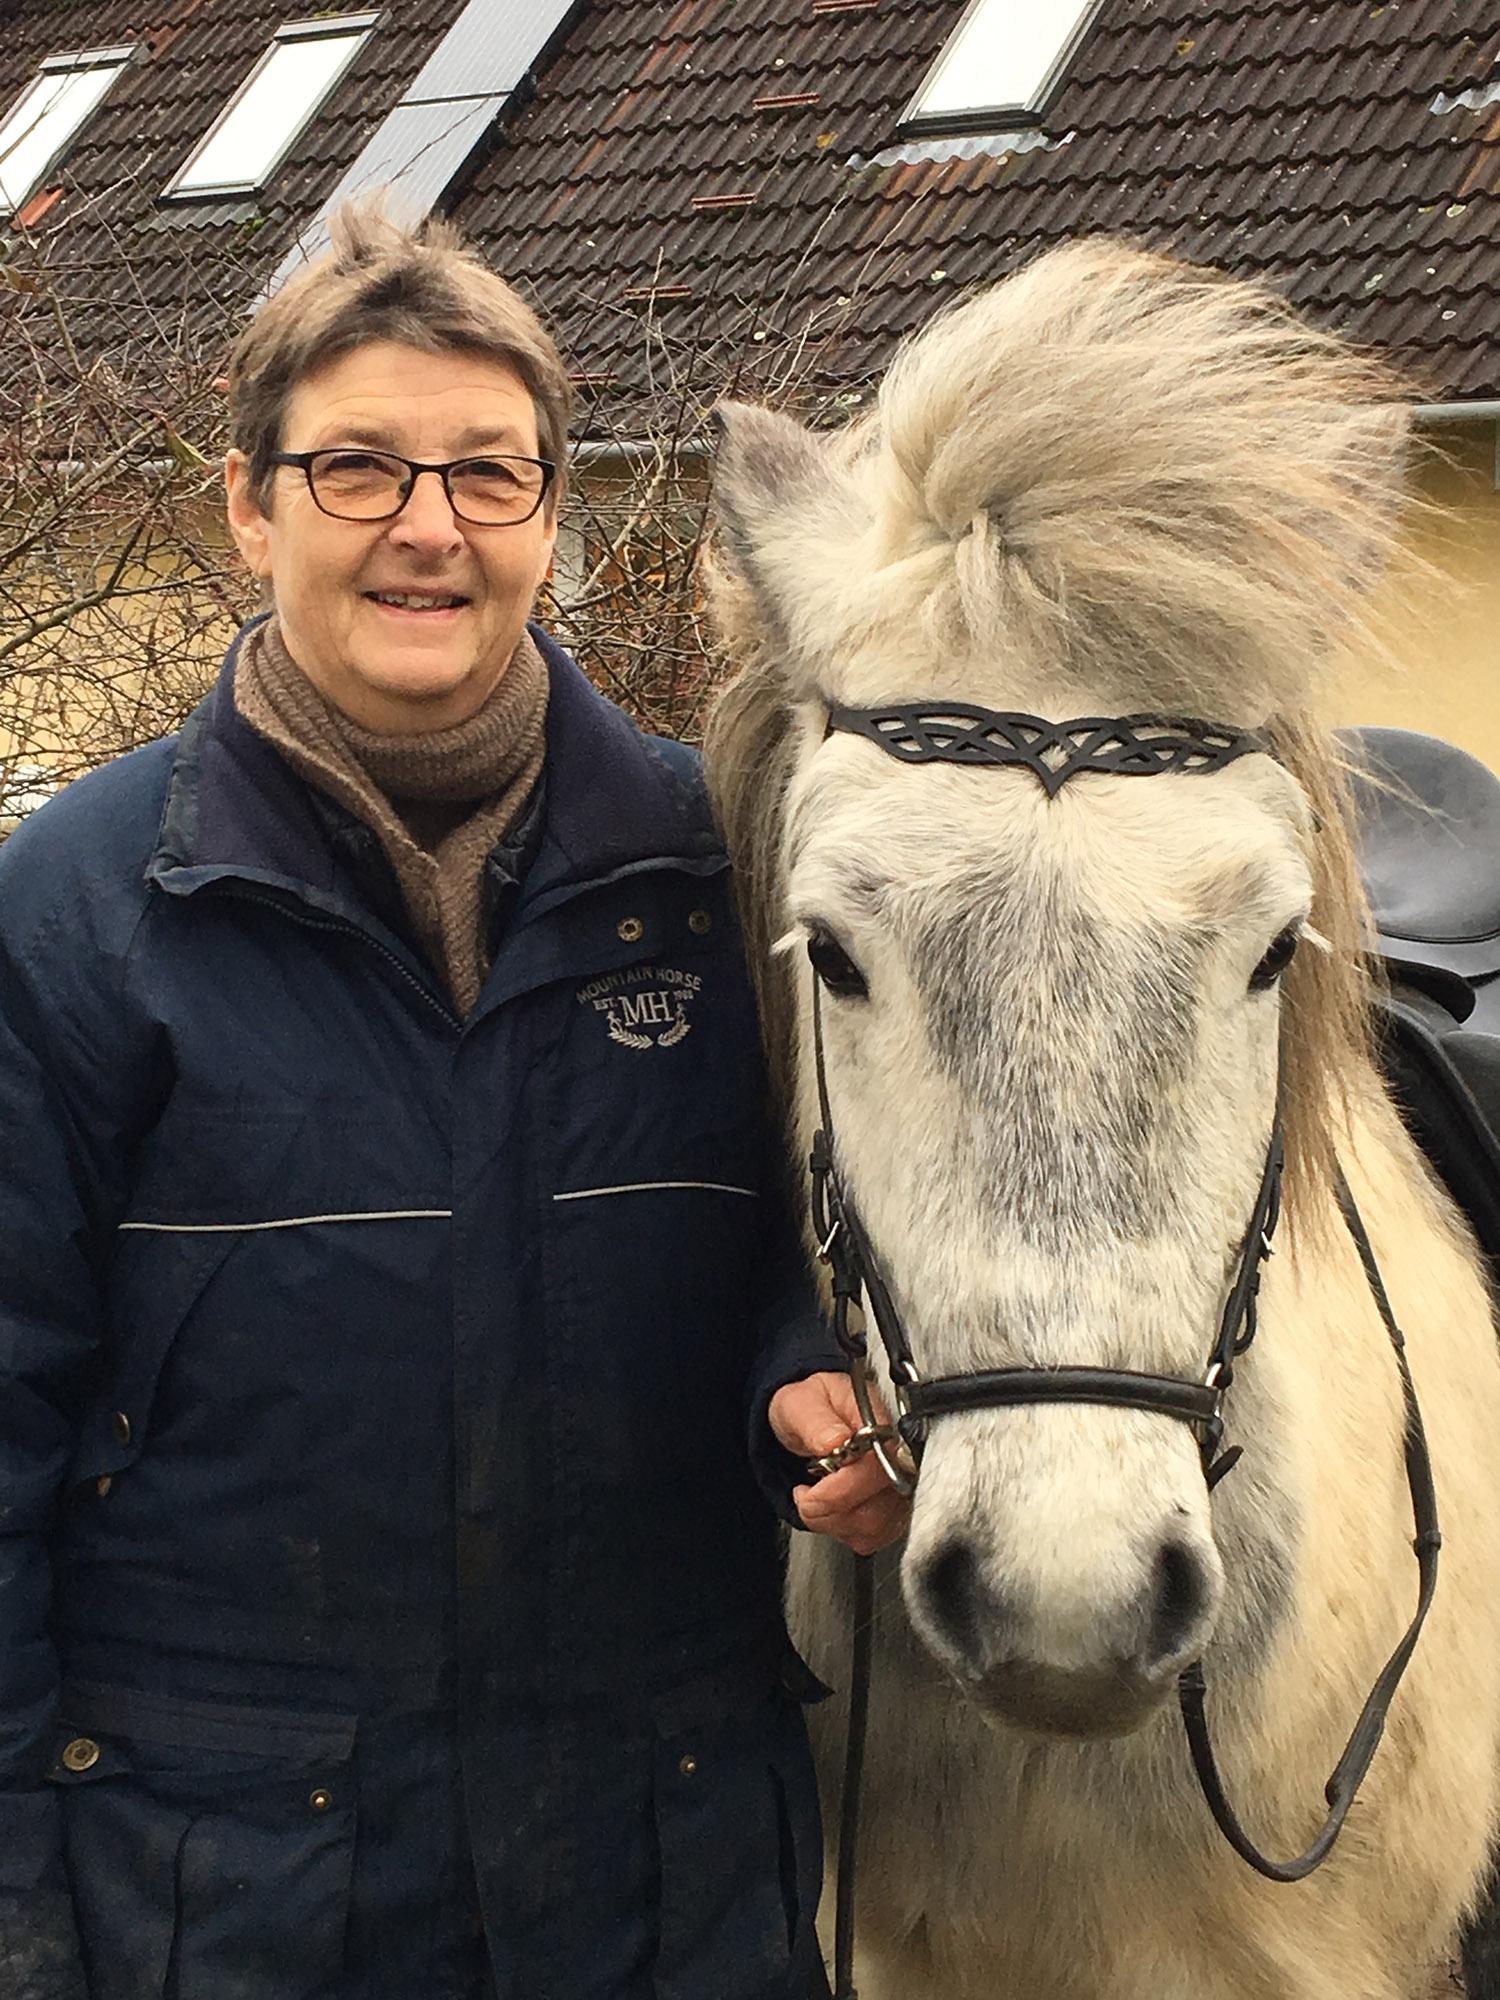 Birgit Lehman, local horseback rider and co-creator of the par force horseback routes which can be found in the experiences list. – © Birgit Lehman